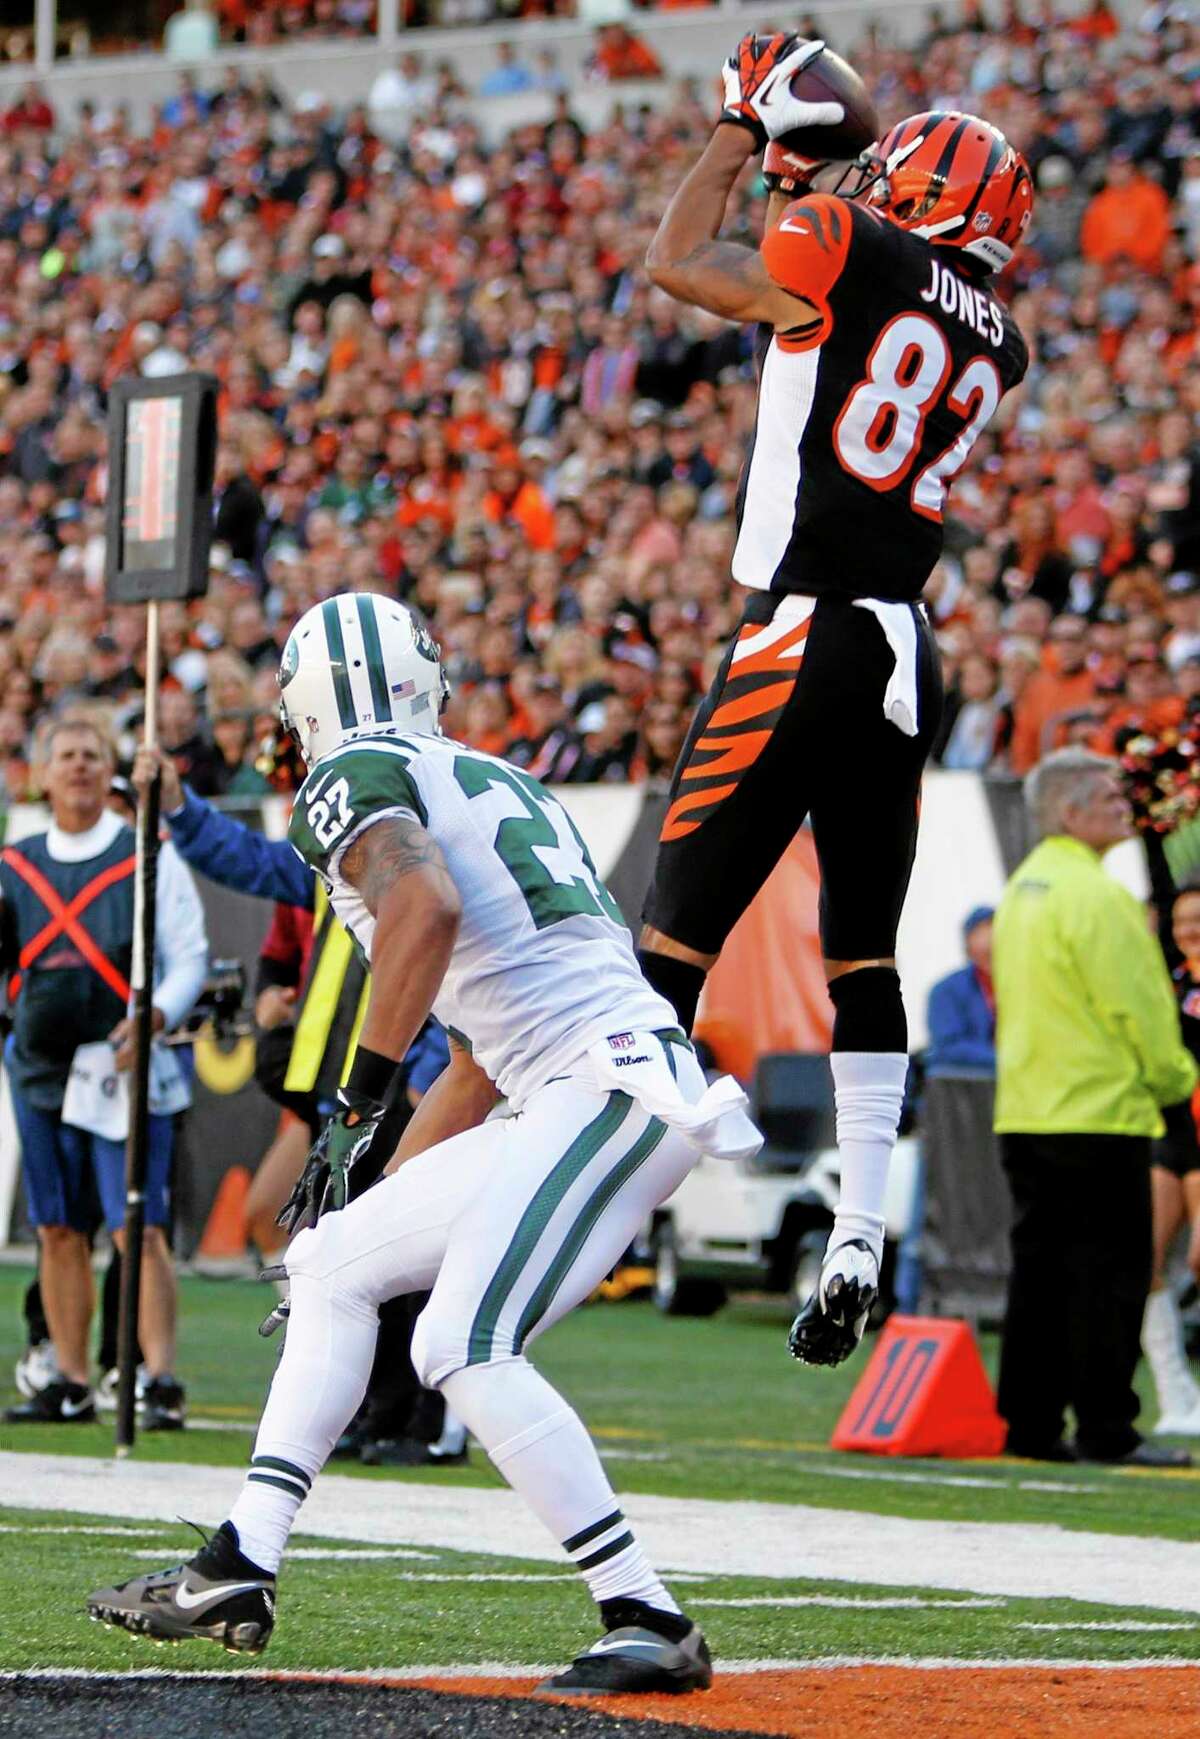 Bengals wide receiver Marvin Jones (82) catches a nine-yard touchdown pass against New York Jets cornerback Dee Milliner (27) in the first half of Sunday’s game in Cincinnati.